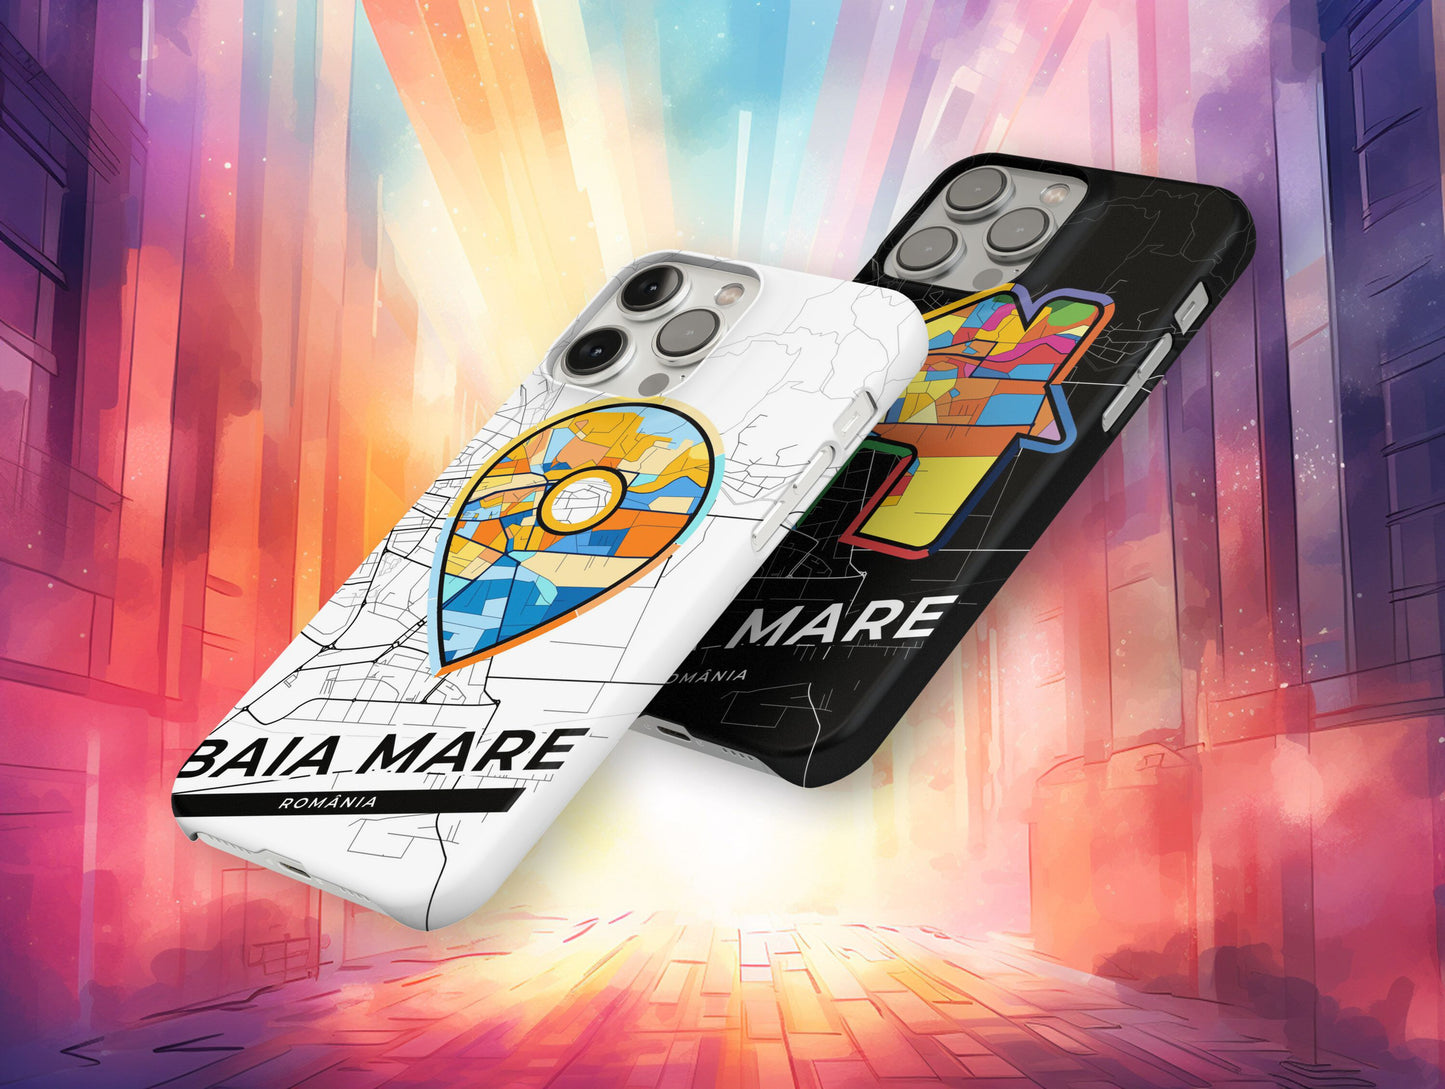 Baia Mare Romania slim phone case with colorful icon. Birthday, wedding or housewarming gift. Couple match cases.